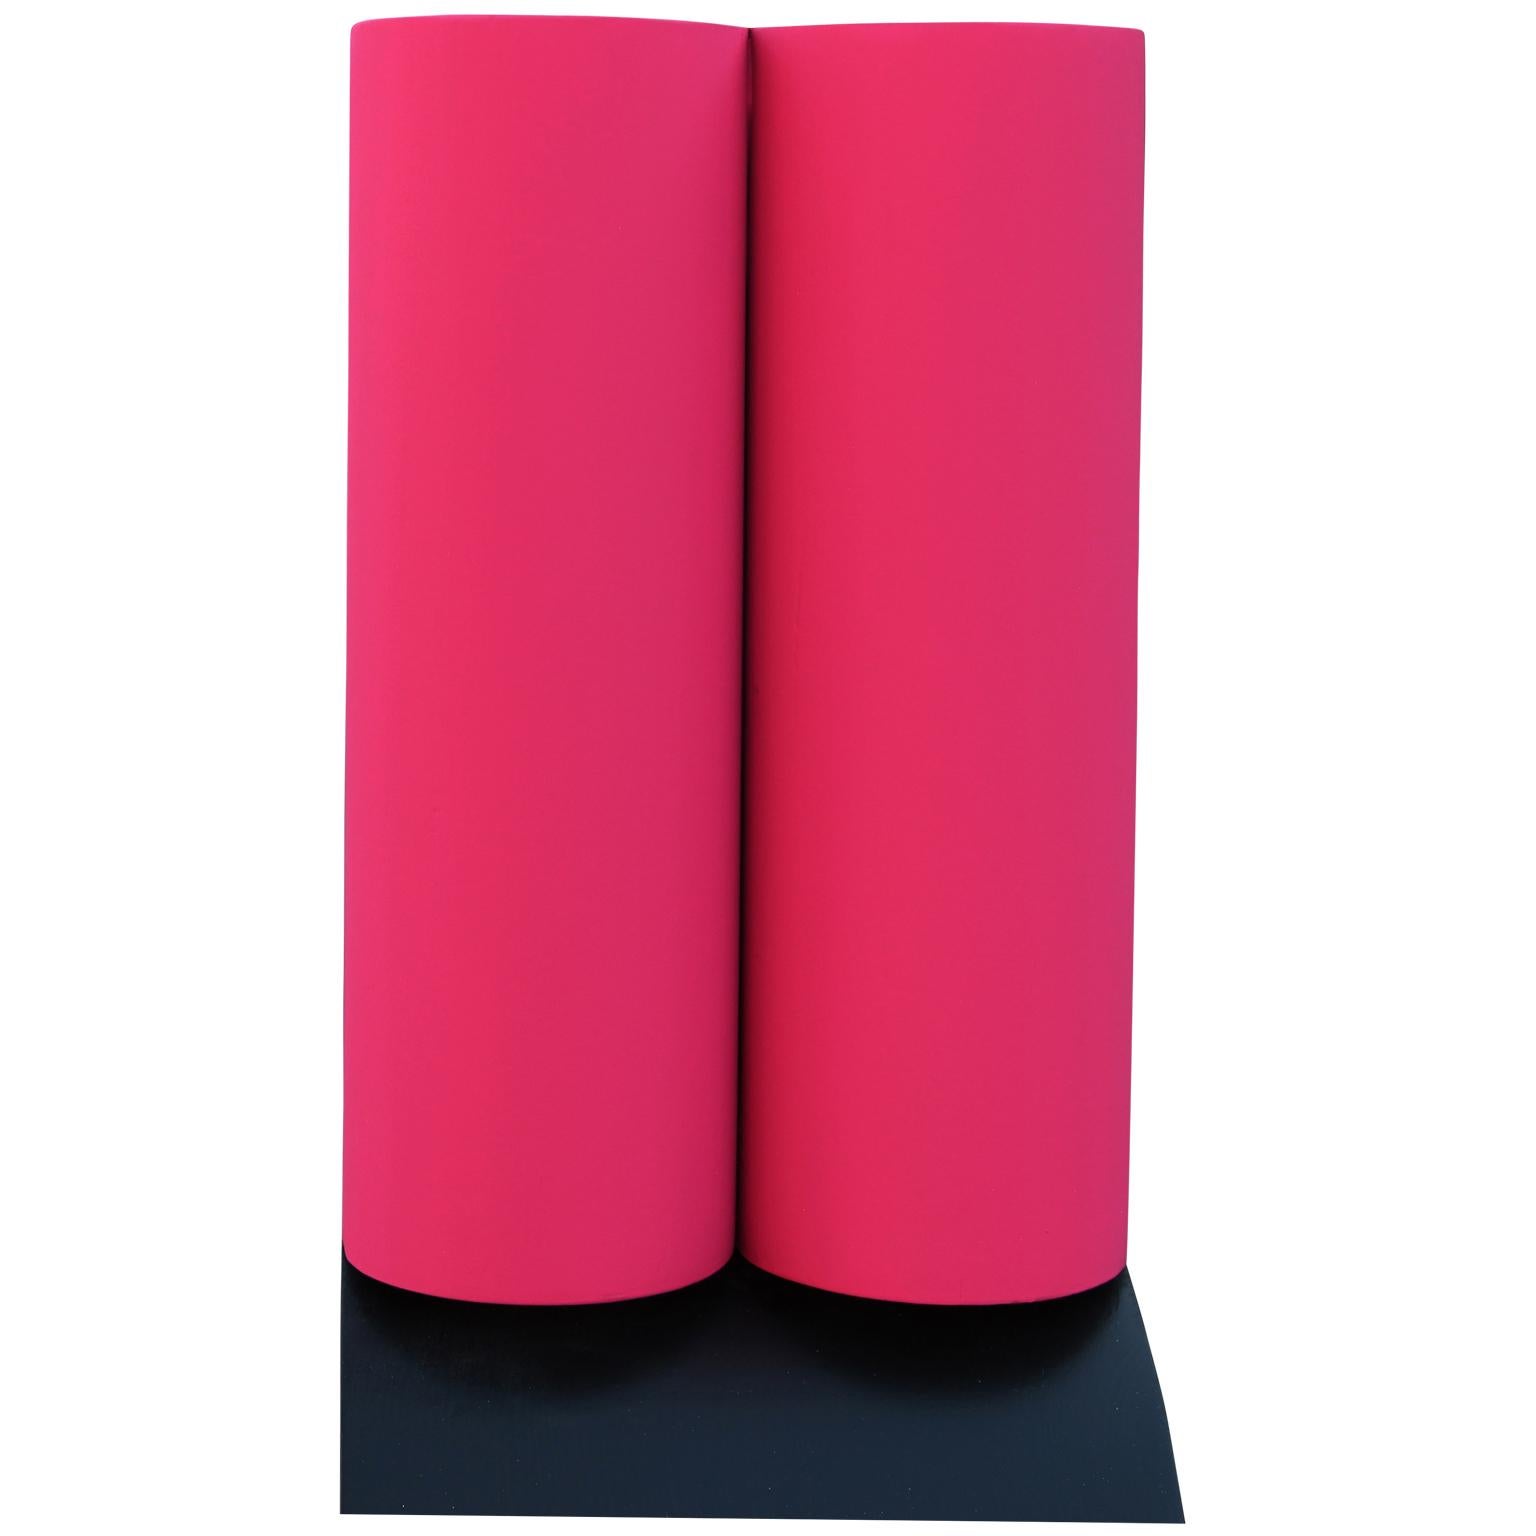 Minimalist black and neon pink organic sculpture by contemporary Houston, TX artist Matthew Reeves. Inspired by buoys commonly found along major waterways, the work features a column of black stacked half cylinders with a pink accent at the top. The